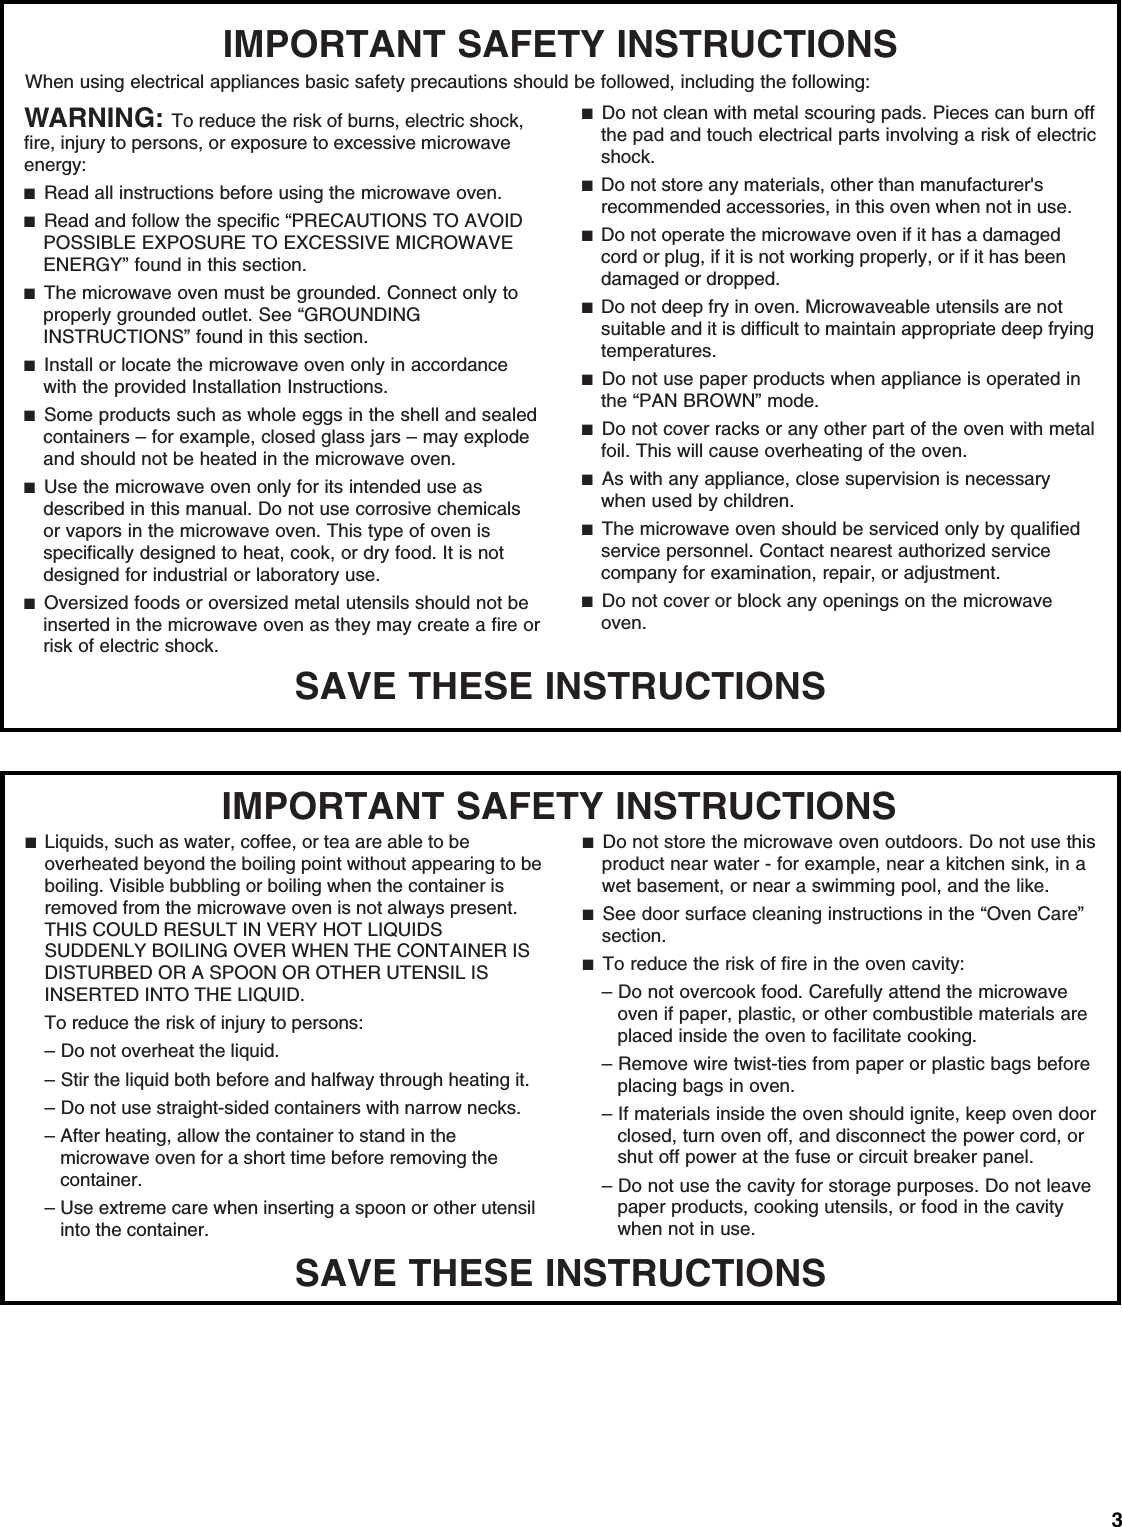 3SAVE THESE INSTRUCTIONSIMPORTANT SAFETY INSTRUCTIONSWhen using electrical appliances basic safety precautions should be followed, including the following:WARNING: To reduce the risk of burns, electric shock, fire, injury to persons, or exposure to excessive microwave energy: ■  Read all instructions before using the microwave oven.■  Read and follow the specific “PRECAUTIONS TO AVOID POSSIBLE EXPOSURE TO EXCESSIVE MICROWAVE ENERGY” found in this section.■  The microwave oven must be grounded. Connect only to properly grounded outlet. See “GROUNDING INSTRUCTIONS” found in this section.■  Install or locate the microwave oven only in accordance with the provided Installation Instructions.■  Some products such as whole eggs in the shell and sealed containers – for example, closed glass jars – may explode and should not be heated in the microwave oven. ■  Use the microwave oven only for its intended use as described in this manual. Do not use corrosive chemicals or vapors in the microwave oven. This type of oven is specifically designed to heat, cook, or dry food. It is not designed for industrial or laboratory use.■  Oversized foods or oversized metal utensils should not be inserted in the microwave oven as they may create a fire or risk of electric shock.■  Do not clean with metal scouring pads. Pieces can burn off the pad and touch electrical parts involving a risk of electric shock.■  Do not store any materials, other than manufacturer&apos;s recommended accessories, in this oven when not in use.■  Do not operate the microwave oven if it has a damaged cord or plug, if it is not working properly, or if it has been damaged or dropped.■  Do not deep fry in oven. Microwaveable utensils are not suitable and it is difficult to maintain appropriate deep frying temperatures.■  Do not use paper products when appliance is operated in the “PAN BROWN” mode.■  Do not cover racks or any other part of the oven with metal foil. This will cause overheating of the oven.■  As with any appliance, close supervision is necessary when used by children.■  The microwave oven should be serviced only by qualified service personnel. Contact nearest authorized service company for examination, repair, or adjustment.■  Do not cover or block any openings on the microwave oven. SAVE THESE INSTRUCTIONSIMPORTANT SAFETY INSTRUCTIONS■  Liquids, such as water, coffee, or tea are able to be overheated beyond the boiling point without appearing to be boiling. Visible bubbling or boiling when the container is removed from the microwave oven is not always present. THIS COULD RESULT IN VERY HOT LIQUIDS SUDDENLY BOILING OVER WHEN THE CONTAINER IS DISTURBED OR A SPOON OR OTHER UTENSIL IS INSERTED INTO THE LIQUID.To reduce the risk of injury to persons:– Do not overheat the liquid.– Stir the liquid both before and halfway through heating it.– Do not use straight-sided containers with narrow necks.– After heating, allow the container to stand in the microwave oven for a short time before removing the container.– Use extreme care when inserting a spoon or other utensil into the container.■  Do not store the microwave oven outdoors. Do not use this product near water - for example, near a kitchen sink, in a wet basement, or near a swimming pool, and the like.■  See door surface cleaning instructions in the “Oven Care” section.■  To reduce the risk of fire in the oven cavity:– Do not overcook food. Carefully attend the microwave oven if paper, plastic, or other combustible materials are placed inside the oven to facilitate cooking.– Remove wire twist-ties from paper or plastic bags before placing bags in oven.– If materials inside the oven should ignite, keep oven door closed, turn oven off, and disconnect the power cord, or shut off power at the fuse or circuit breaker panel.– Do not use the cavity for storage purposes. Do not leave paper products, cooking utensils, or food in the cavity when not in use.